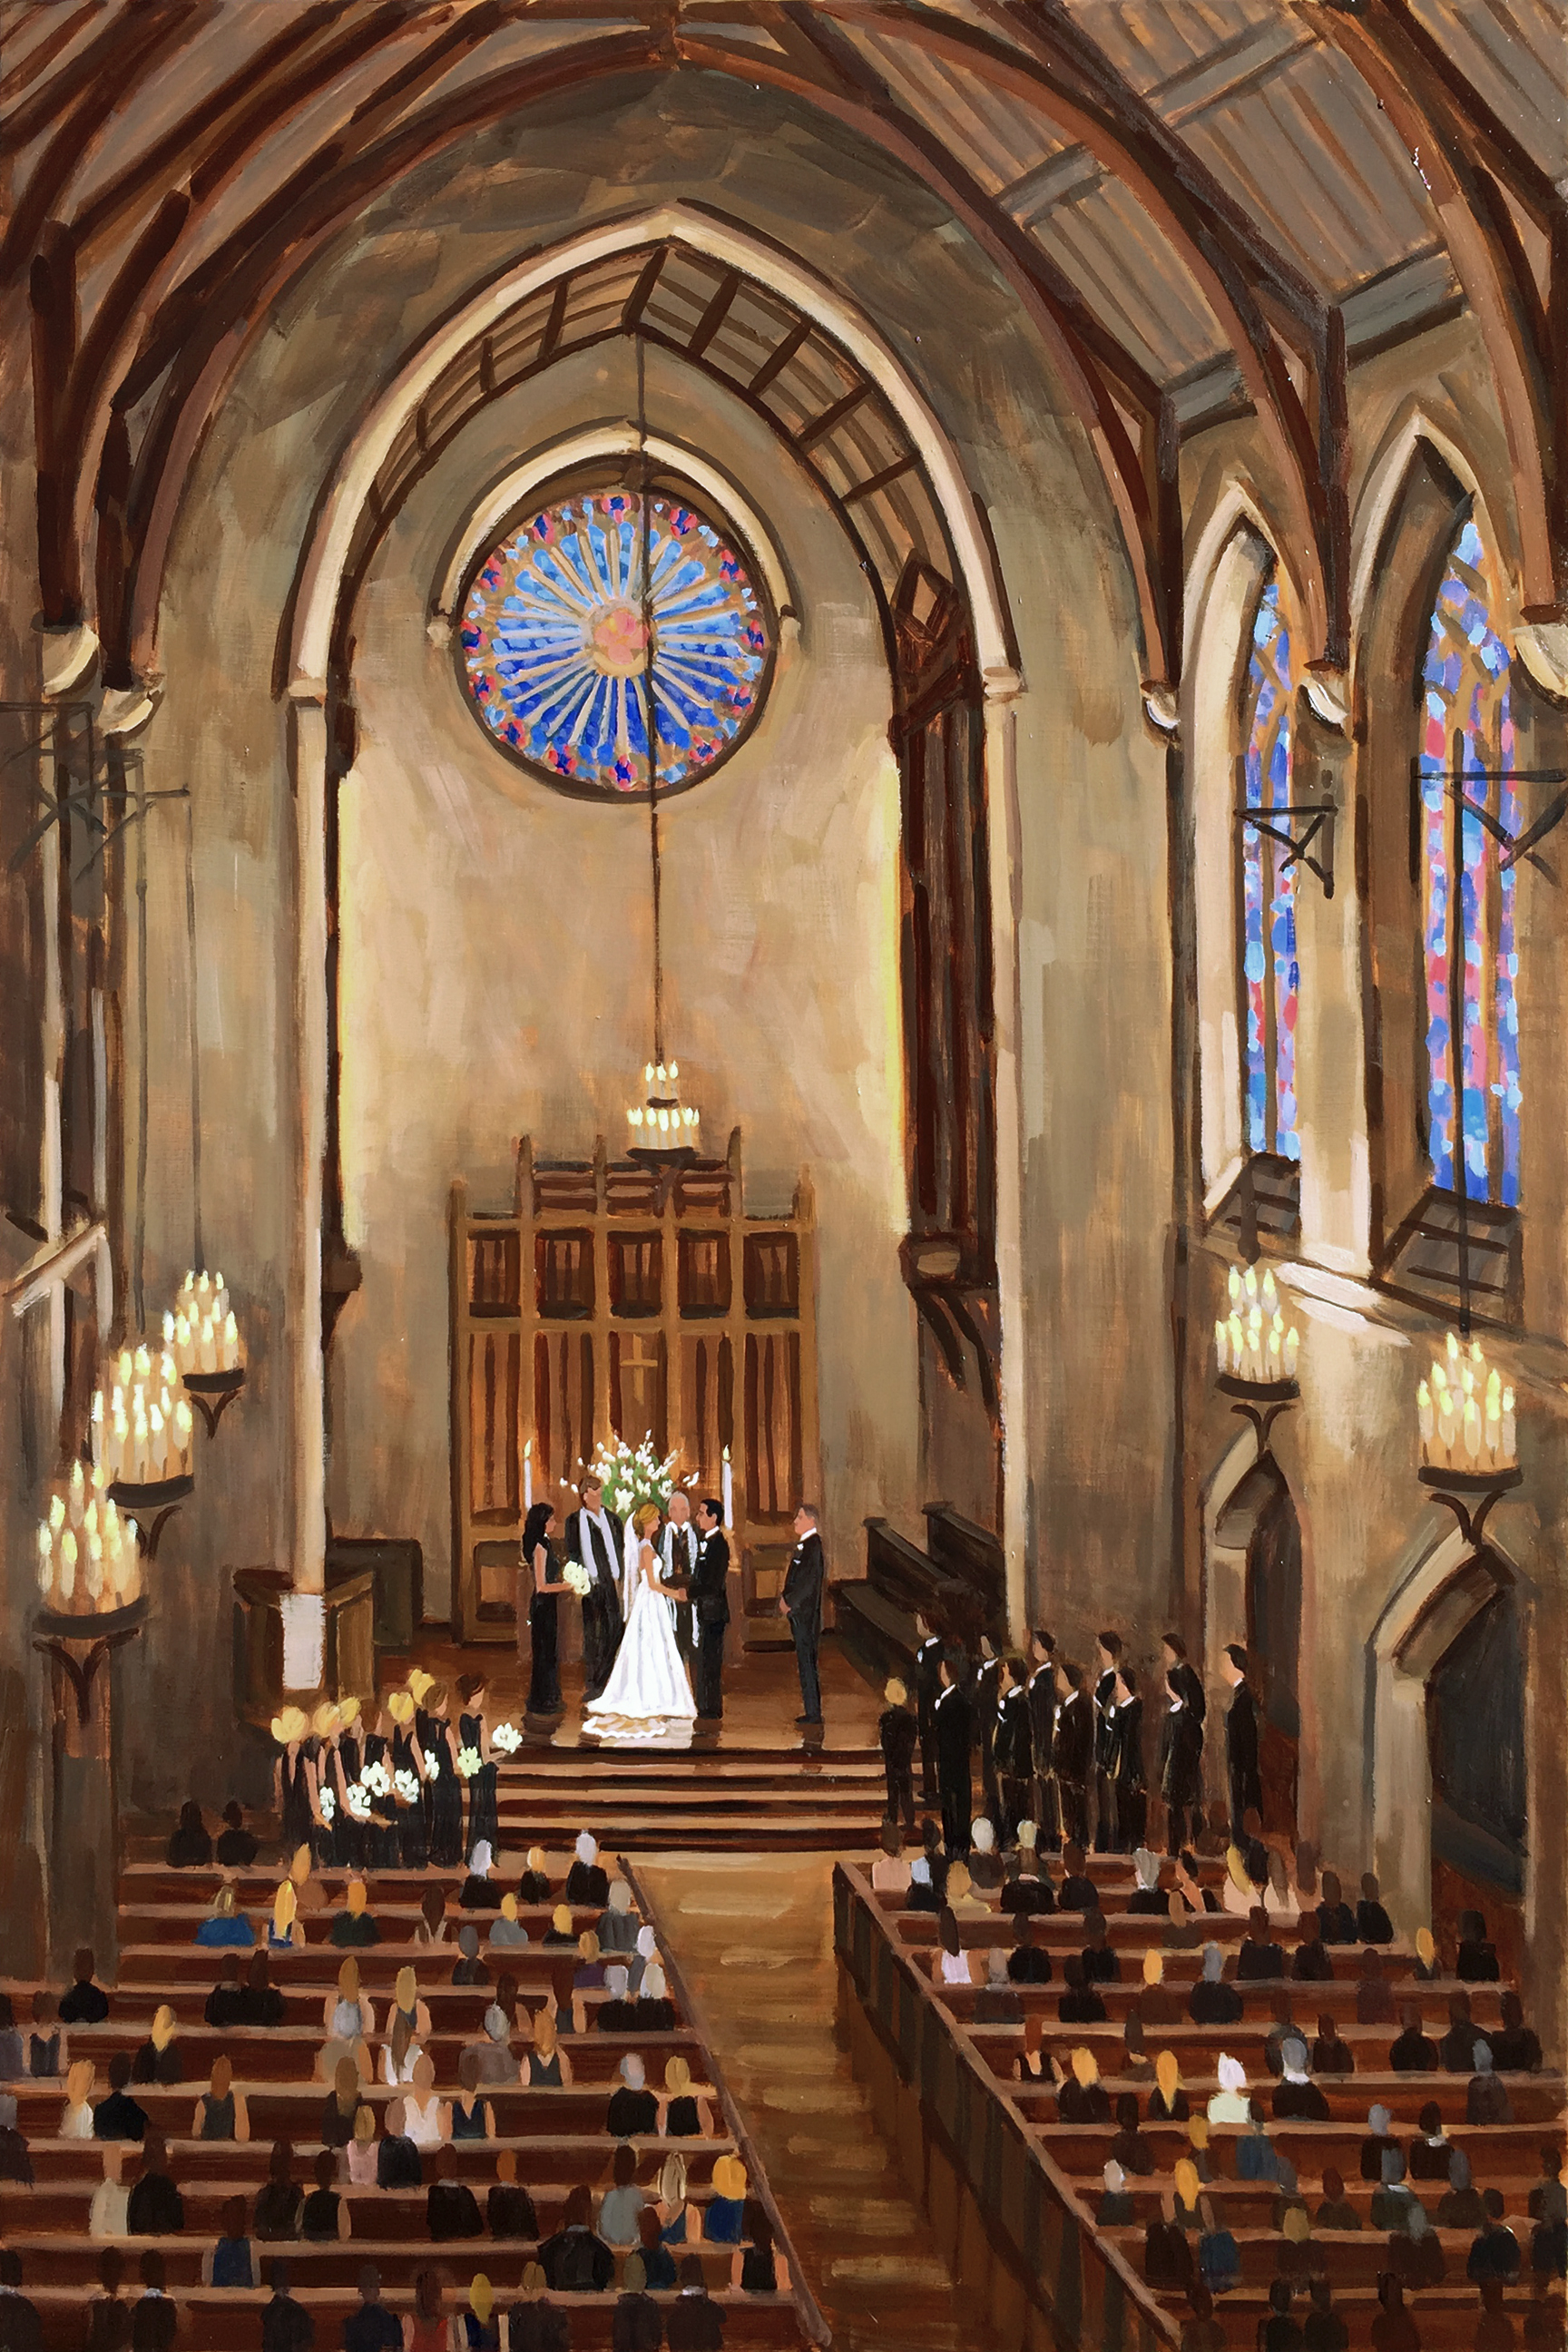 Sarah and Will | 36 x 24 in. Live Wedding Painting